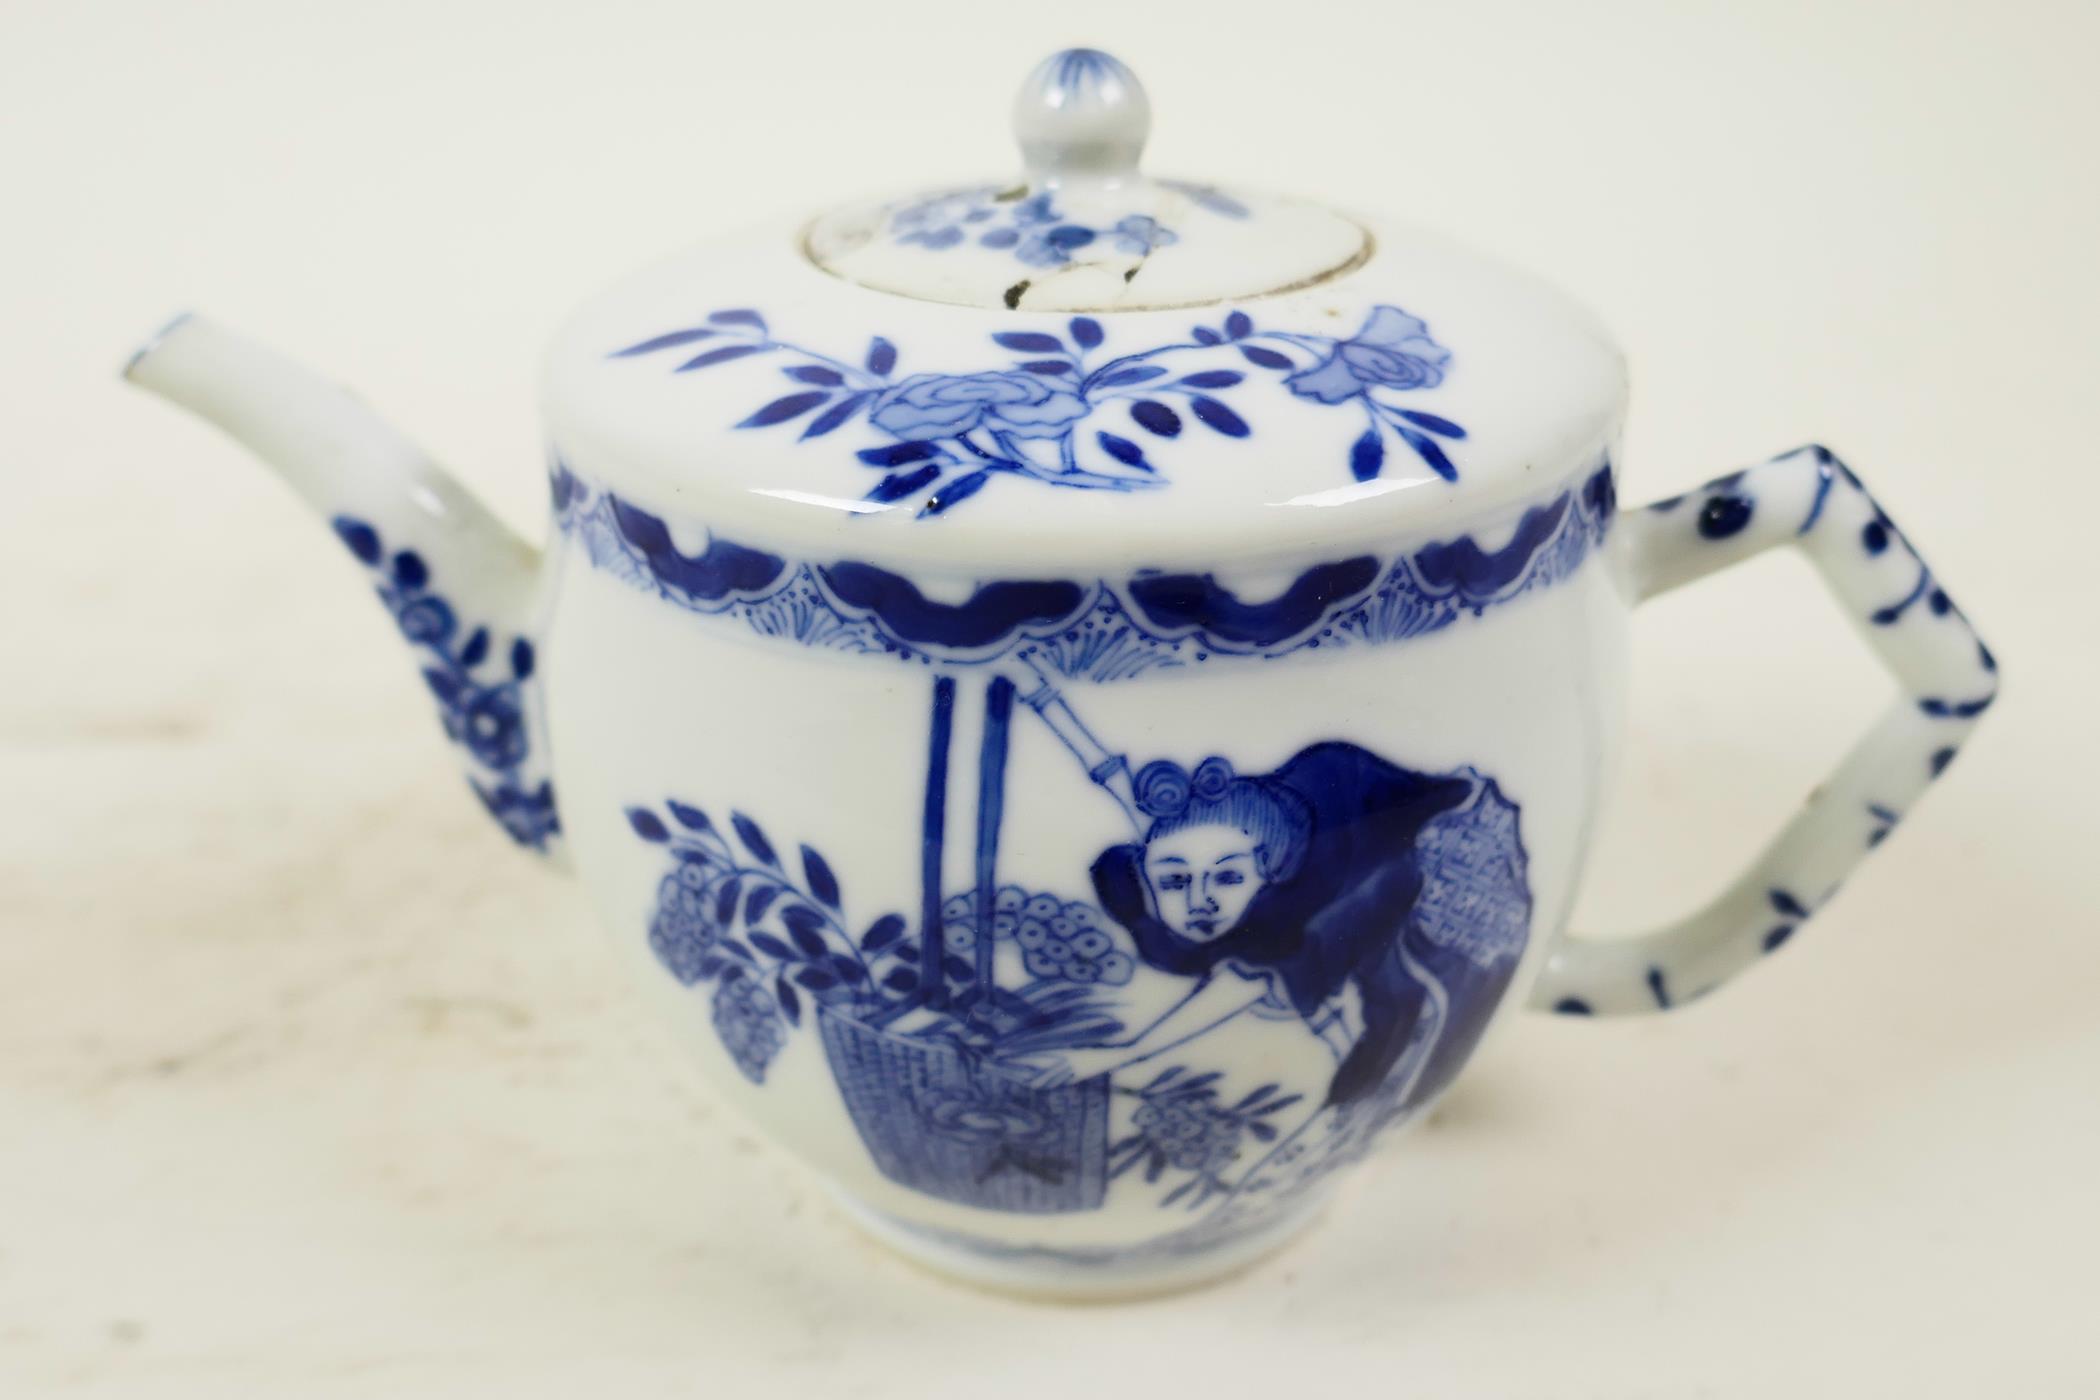 A Chinese style small blue porcelain teapot decorated with birds and blossom, A/F, 3½" high - Image 2 of 4